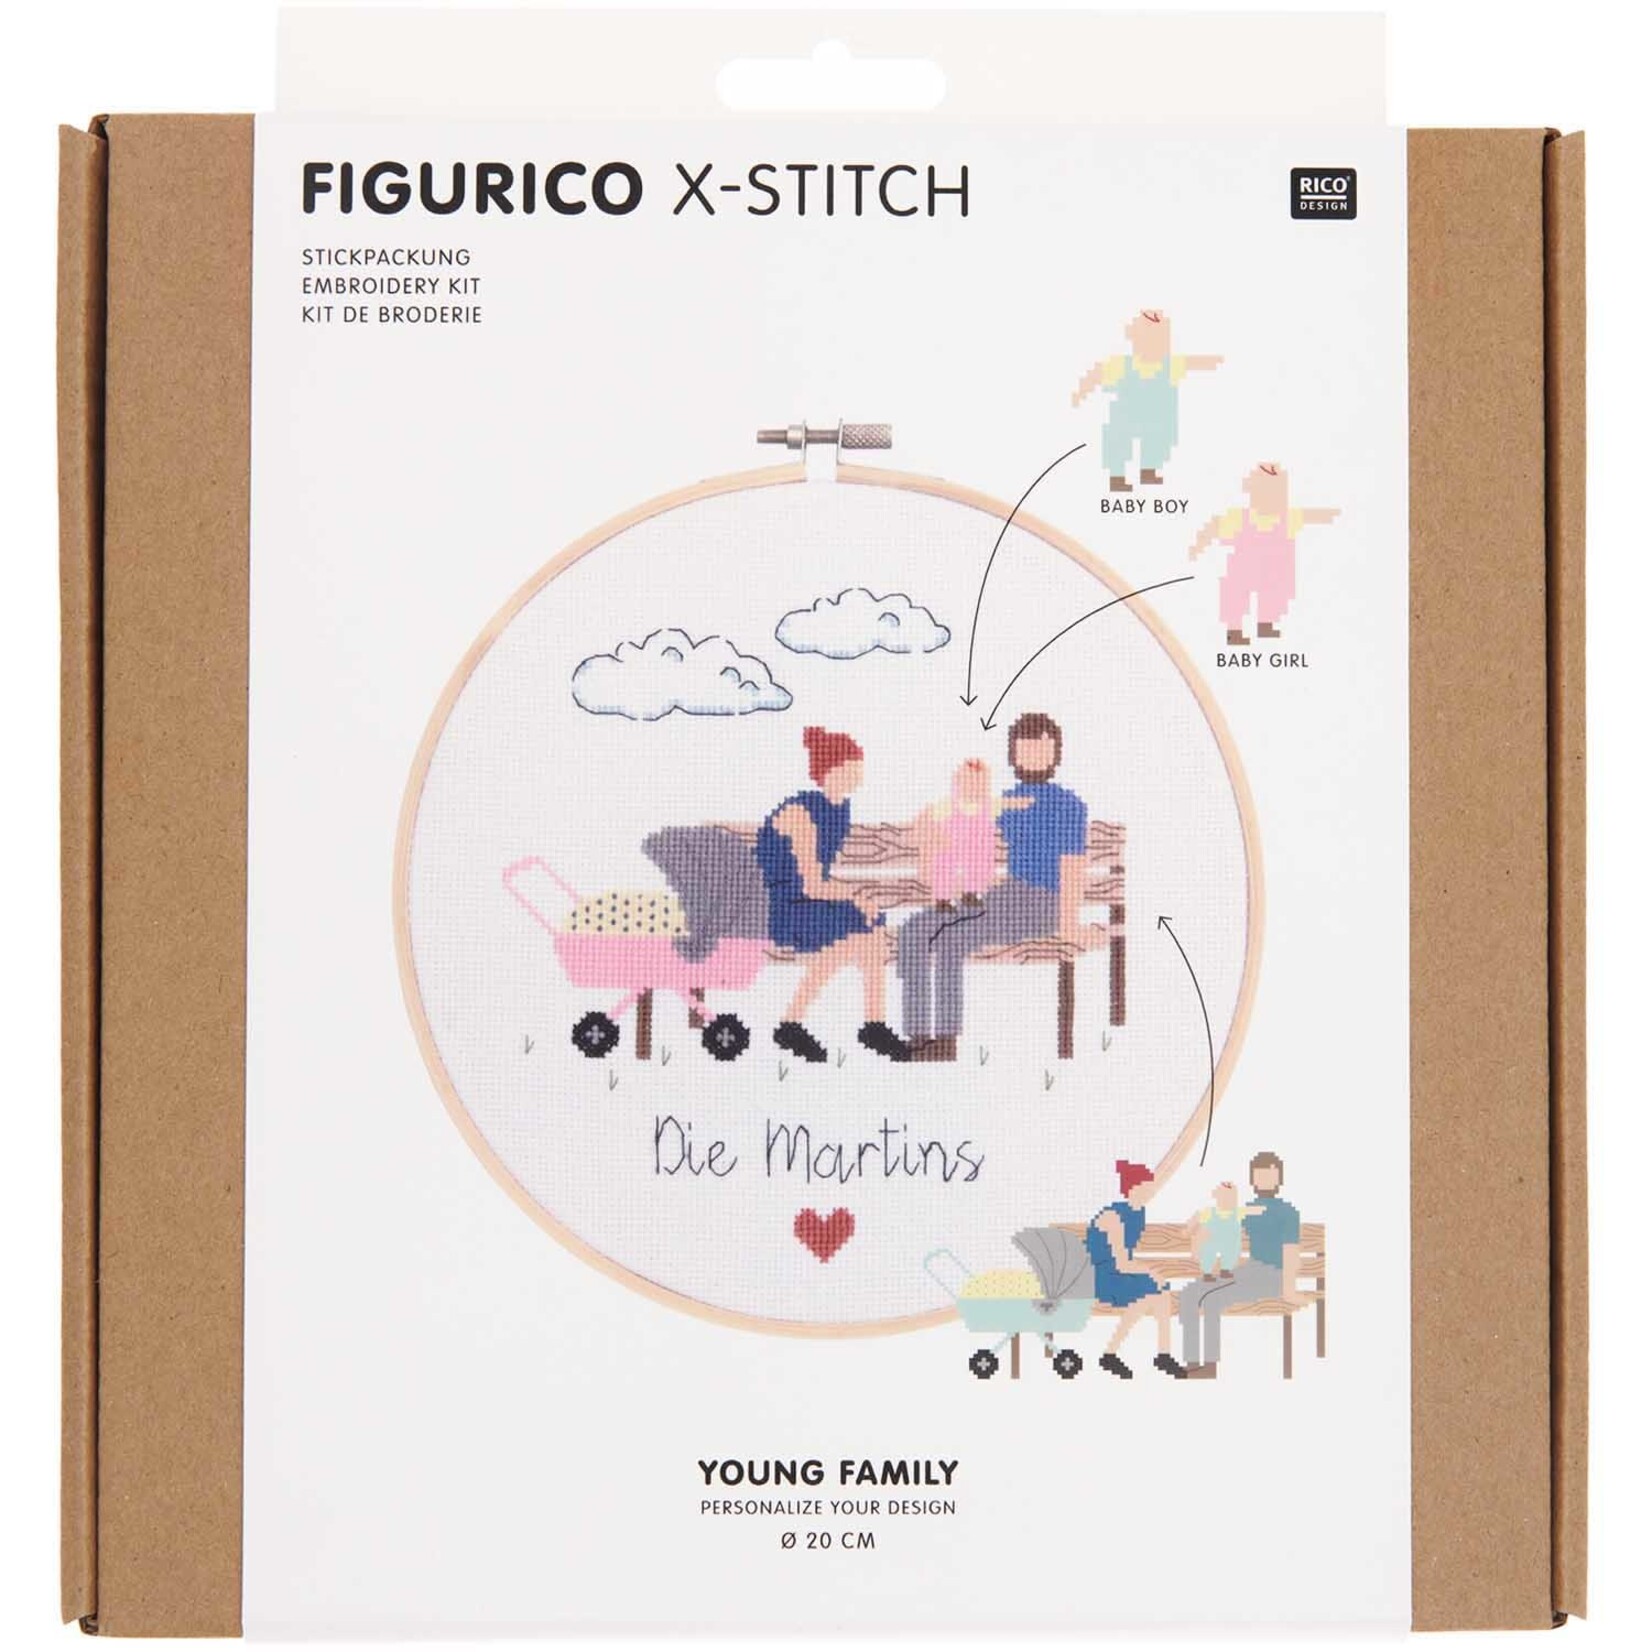 RICO Embroidery kit Figurico Young Family, picture ÃƒËœ 20 cm, counted cross stitch